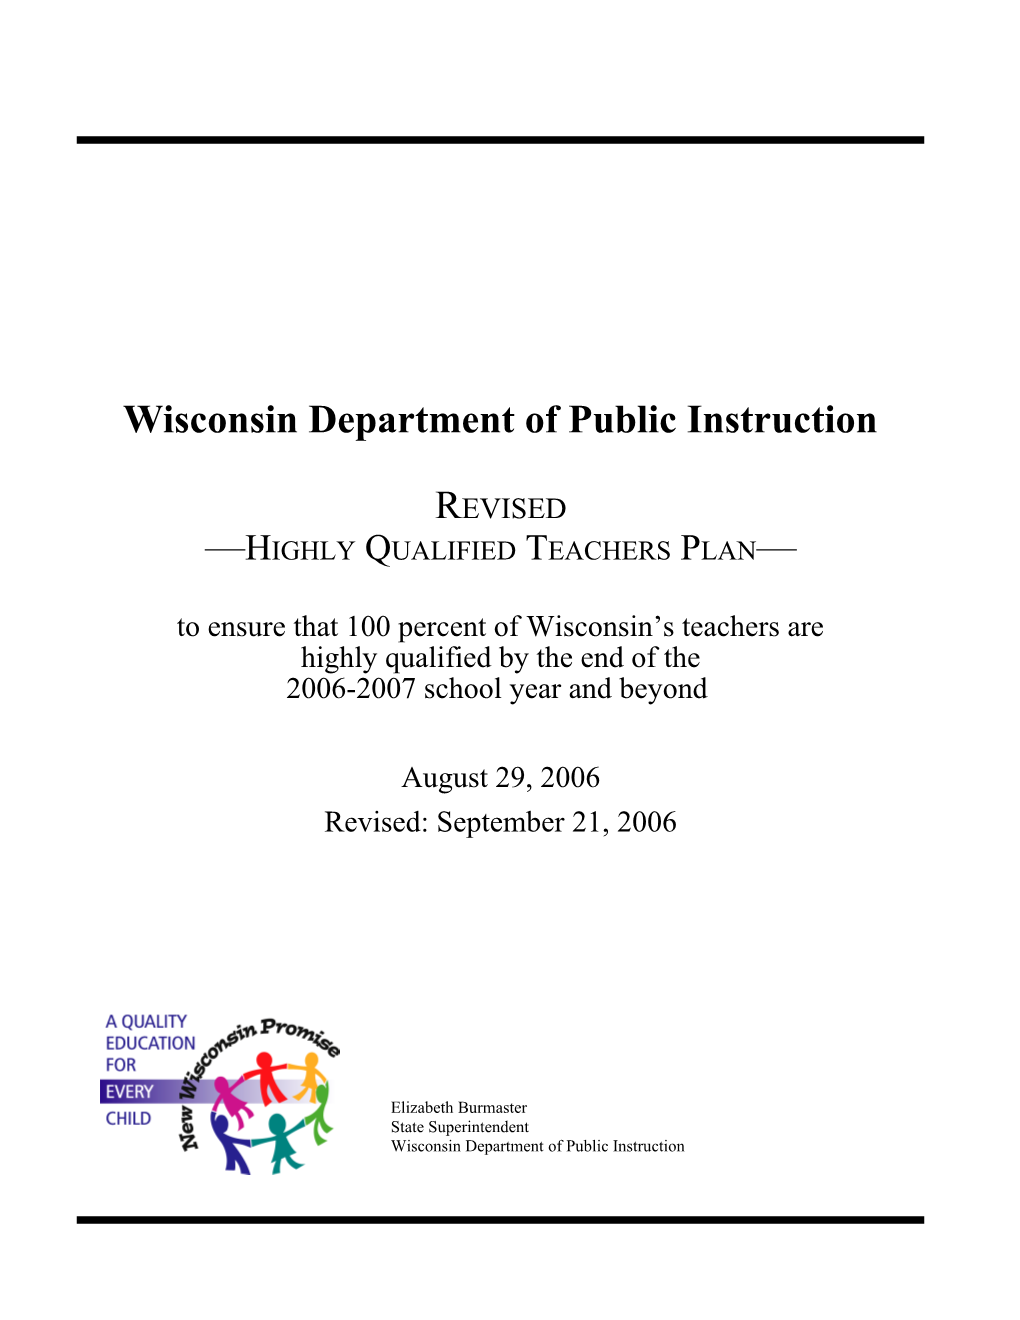 Wisconsin - Revised Highly Qualified Teachers State Plan (MS WORD)